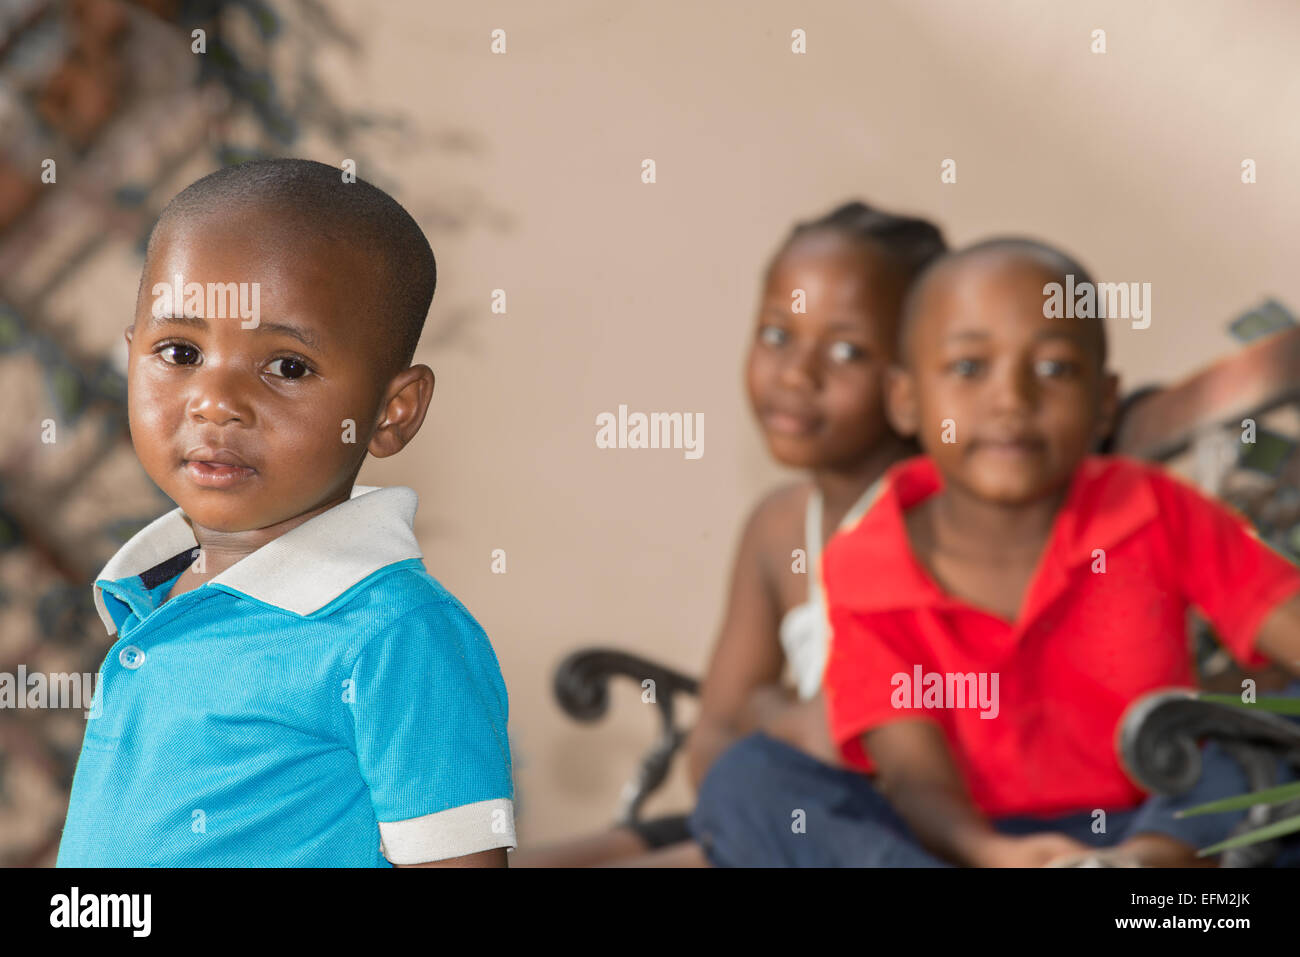 Little boy with his older brother and sister, who are twins, sitting behind him. Stock Photo